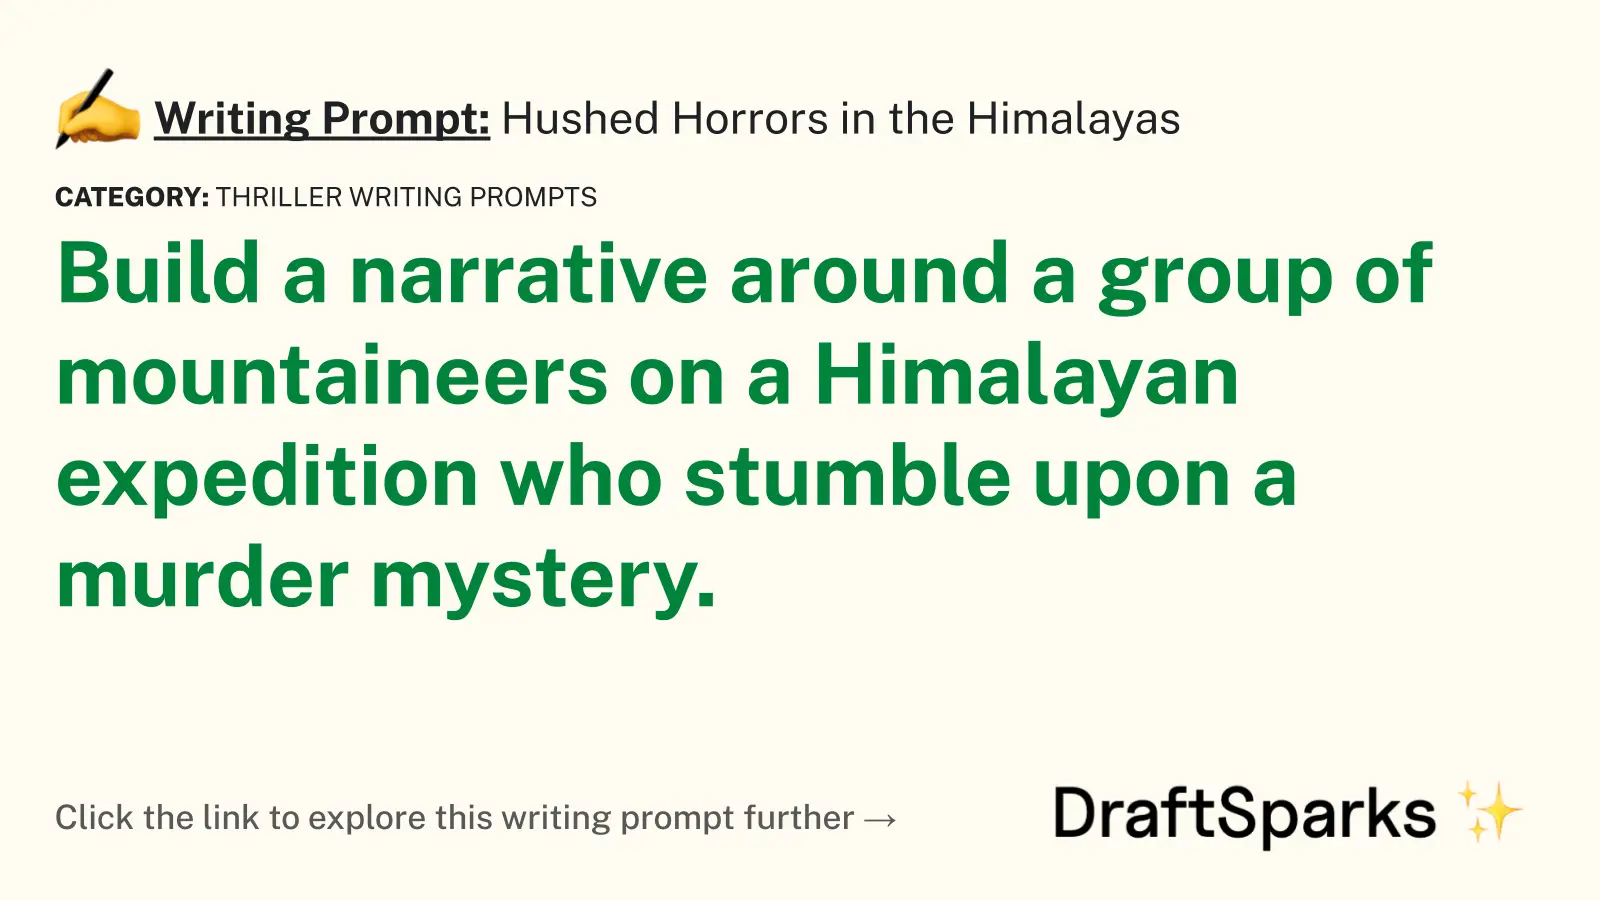 Hushed Horrors in the Himalayas